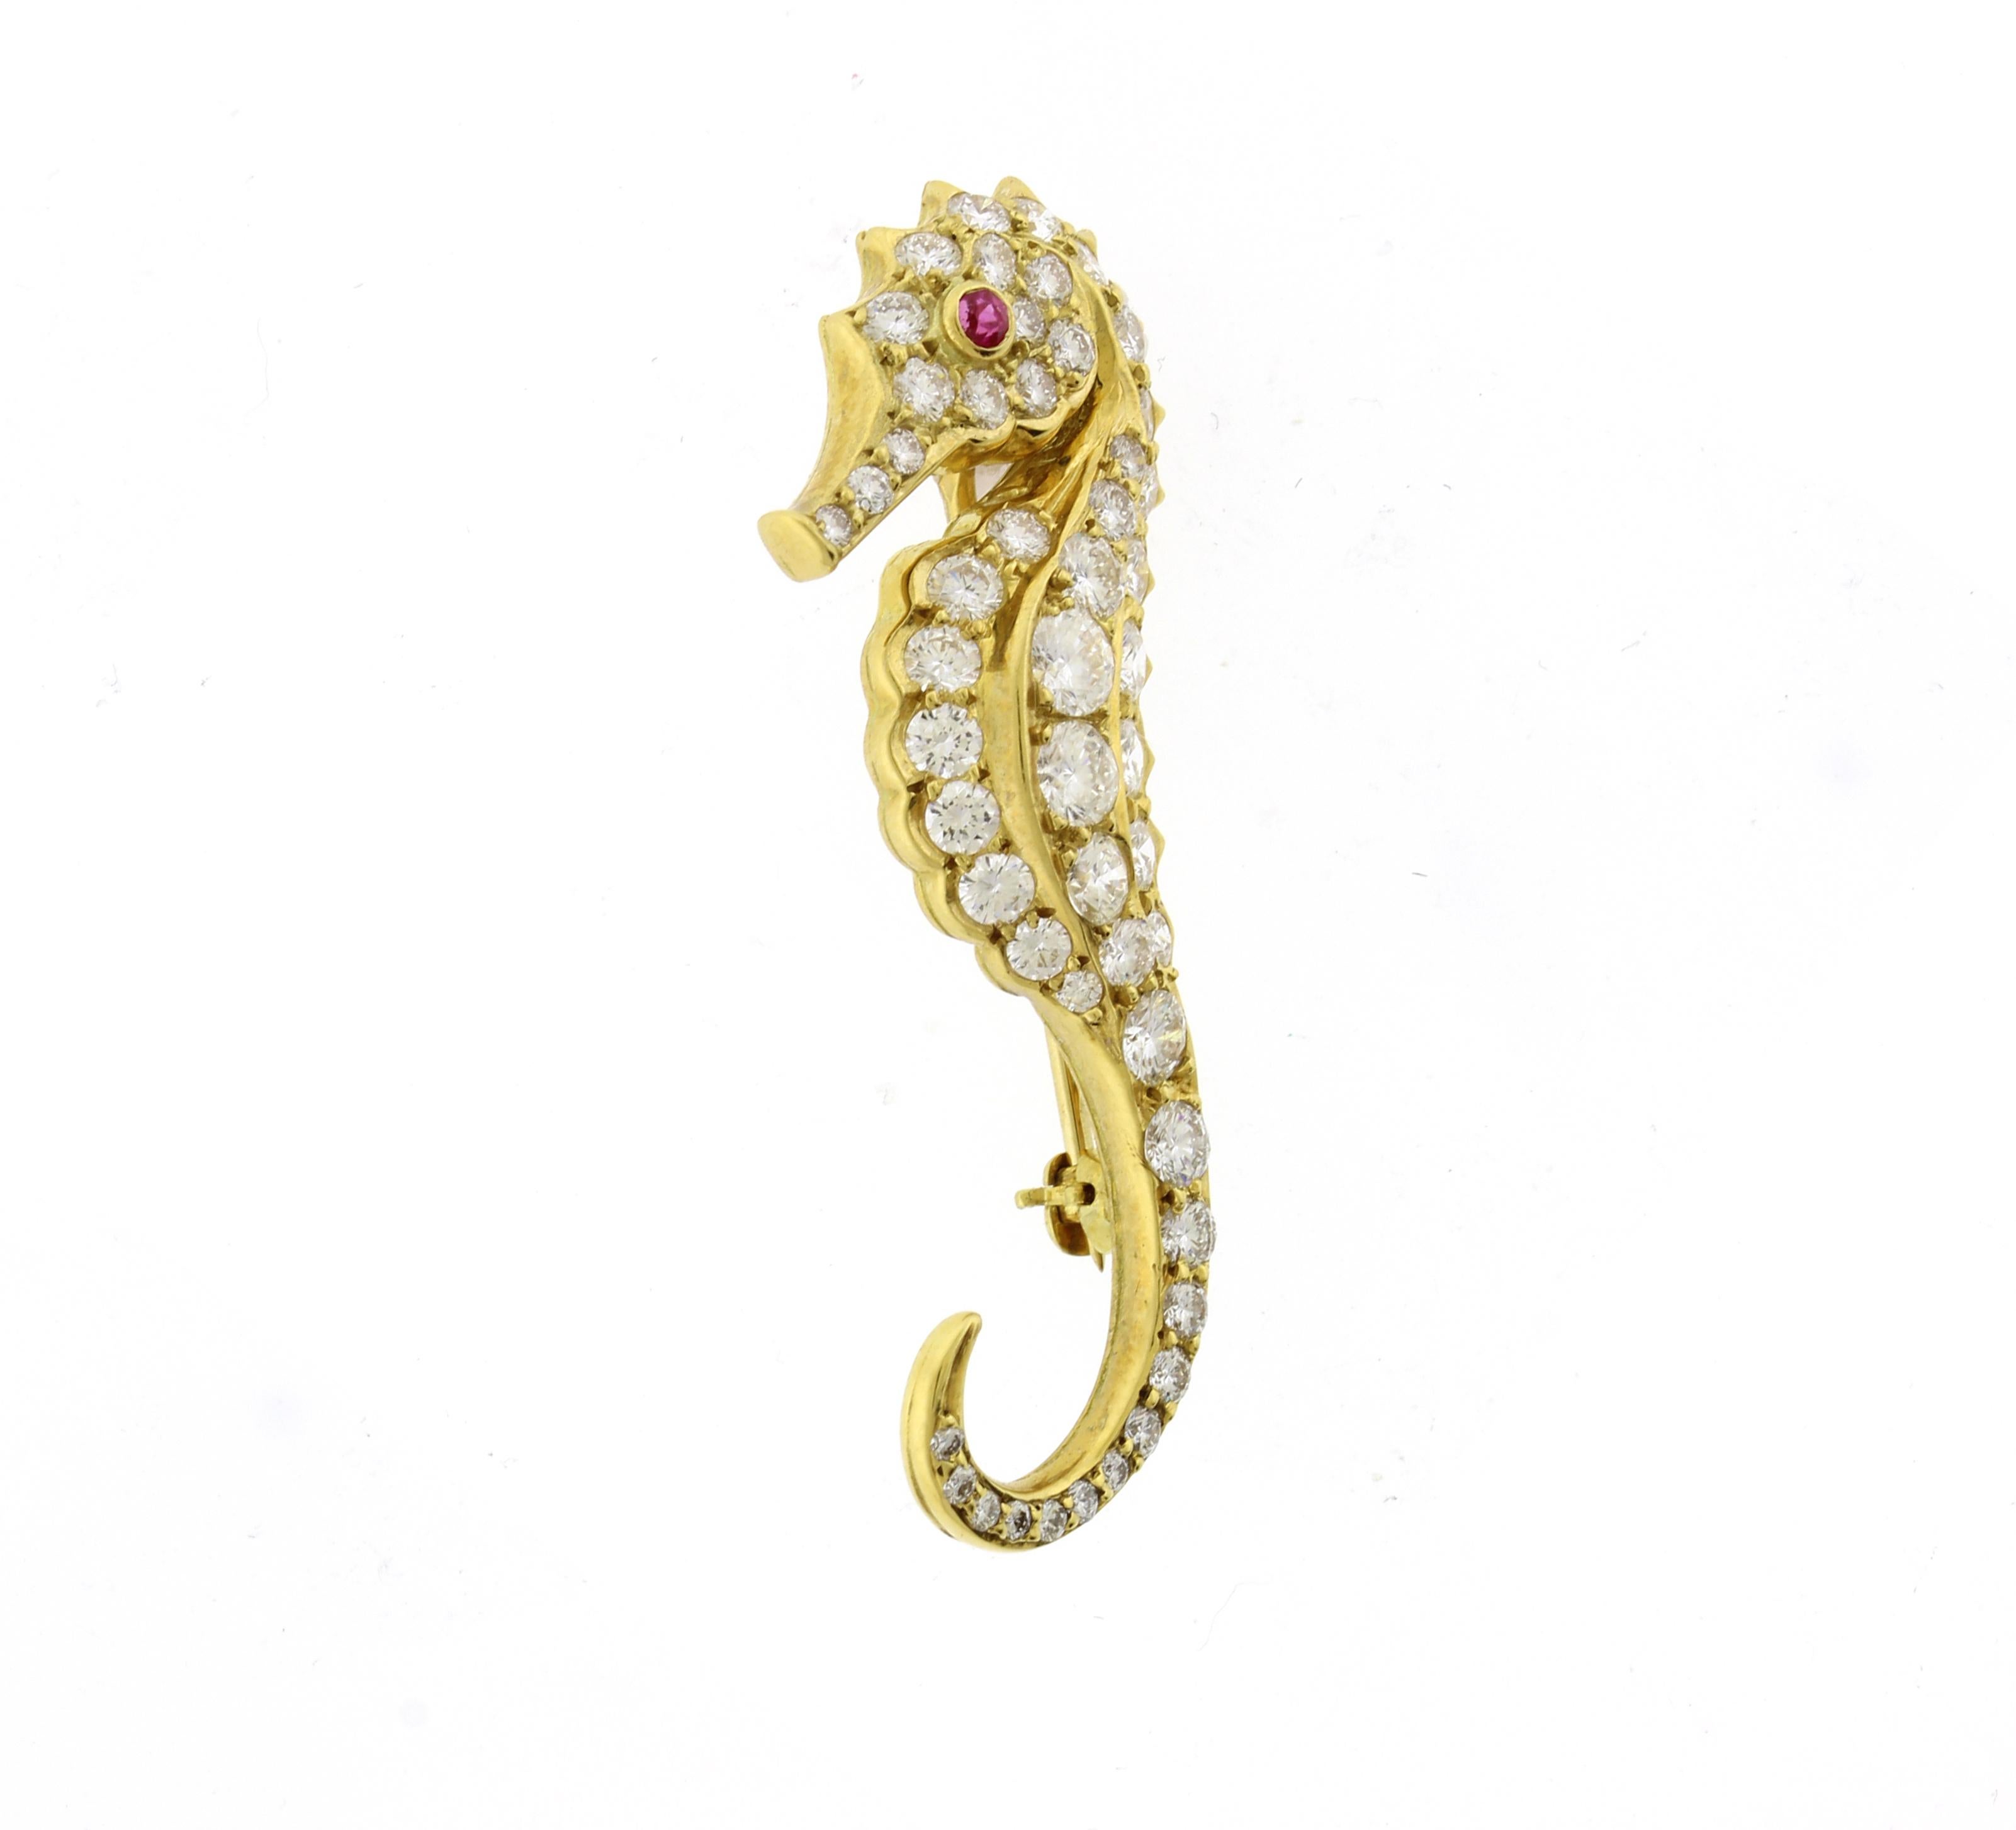 Brilliant Cut Diamond and Ruby Seahorse Brooch by Pampillonia Jewelers For Sale